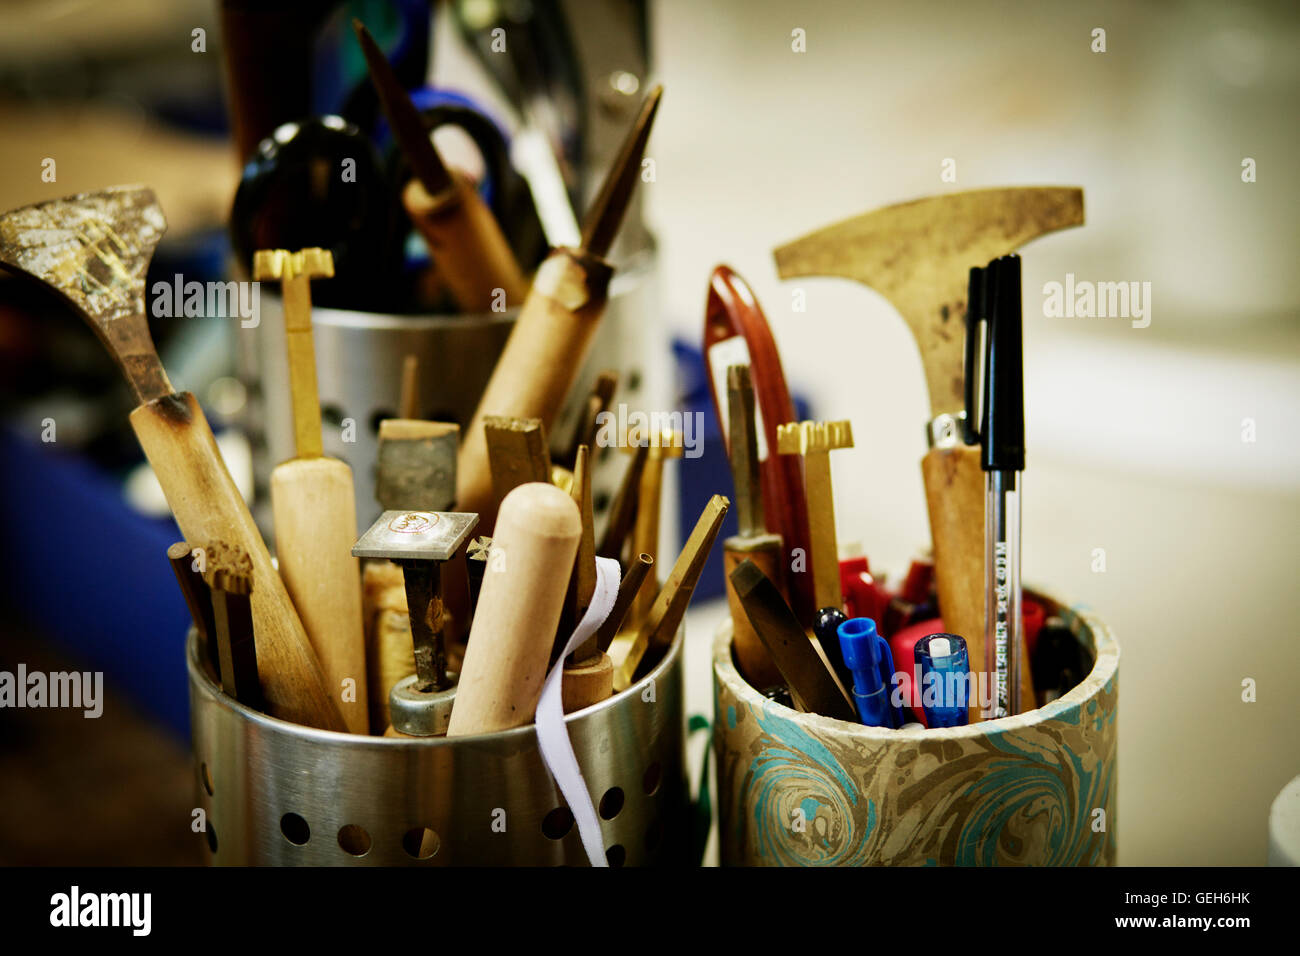 Metal pots full of hand tools for skilled work, for book binding tasks. Stock Photo